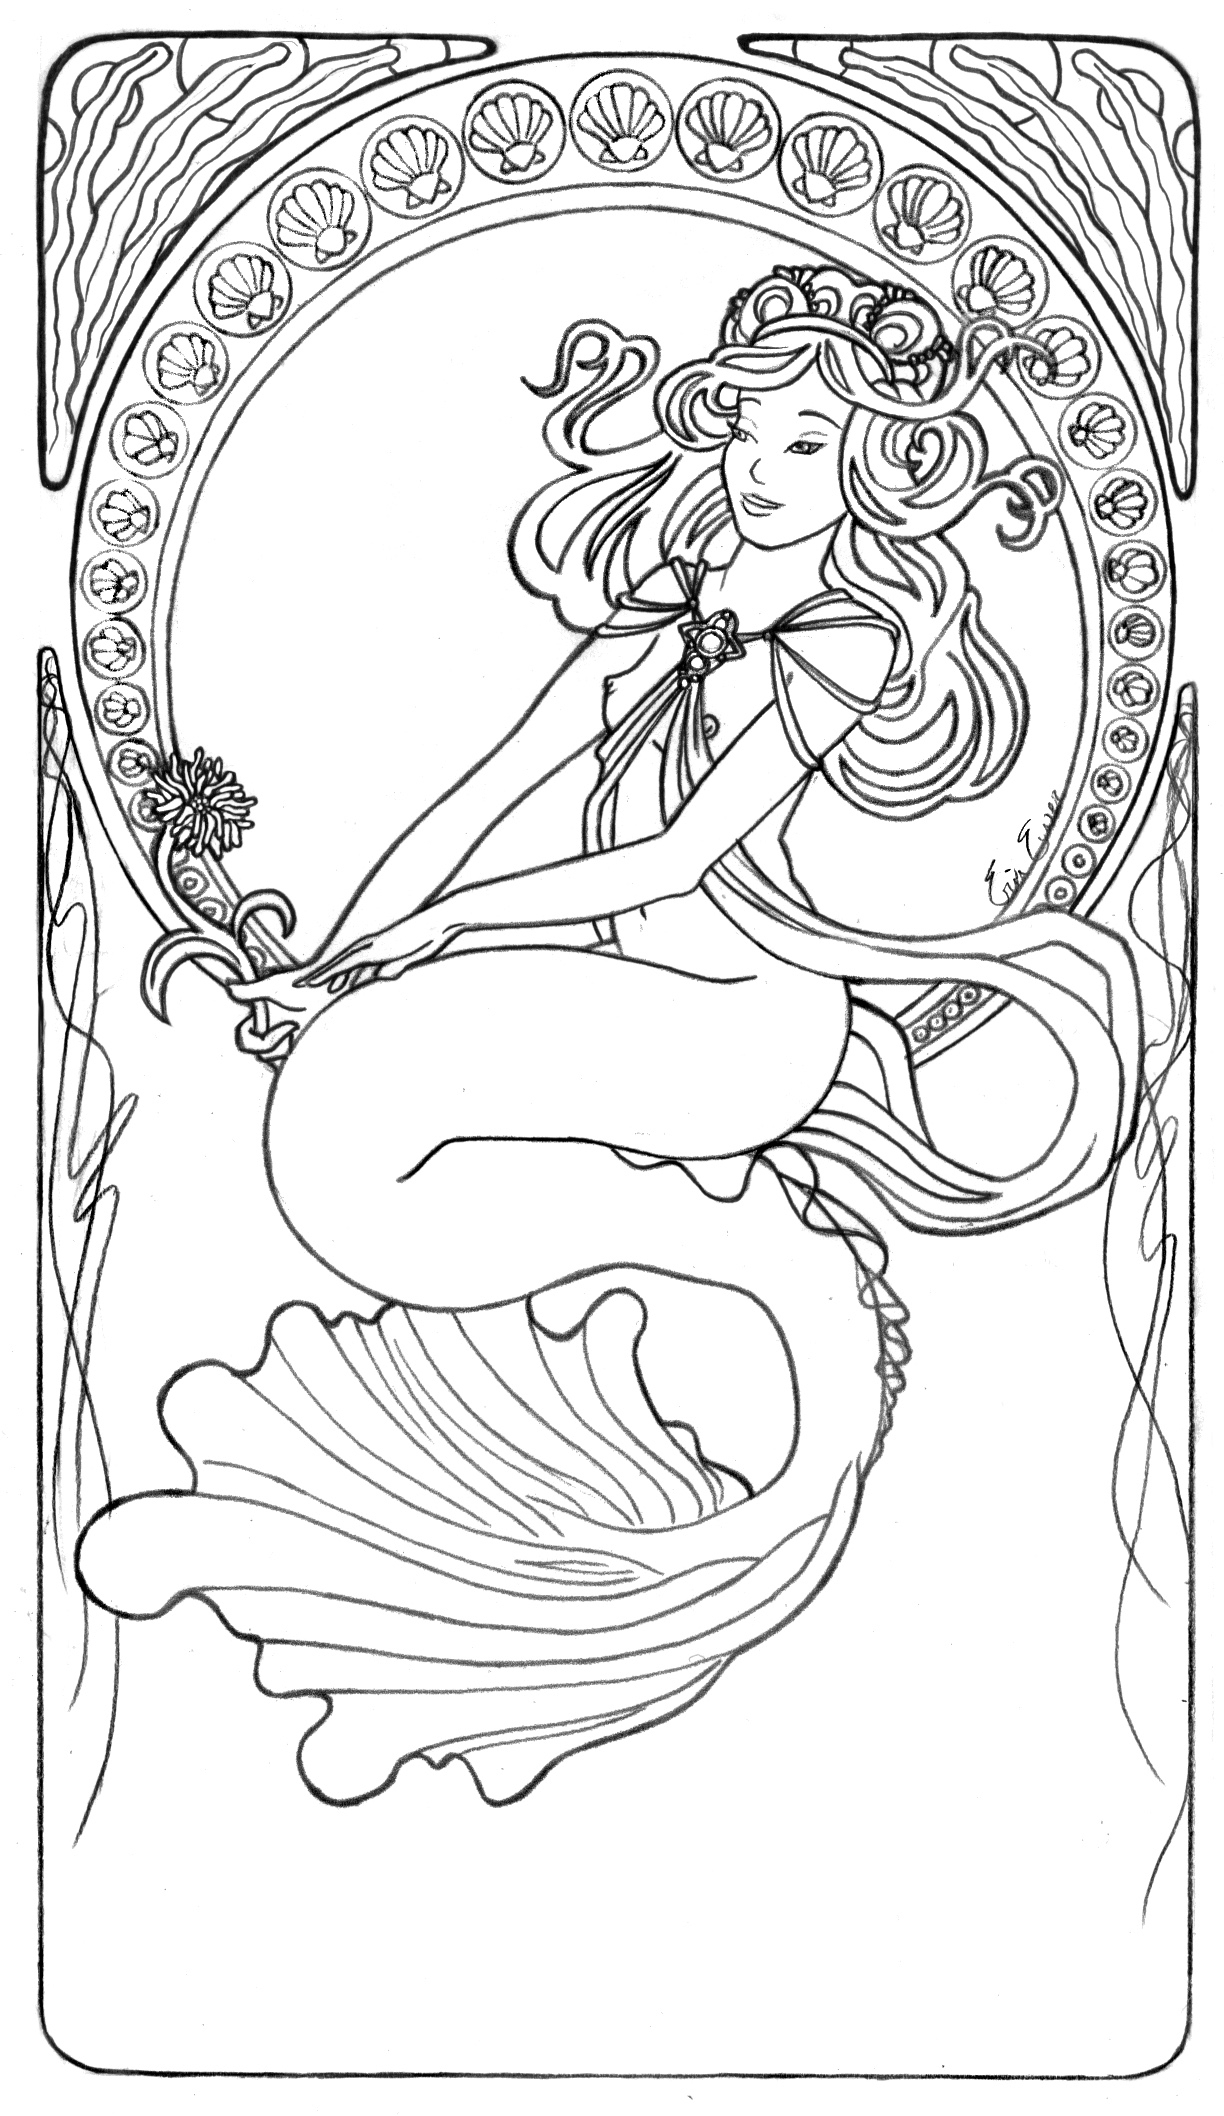 Detailed Mermaid Coloring Pages Collection Mermaid Coloring Pages For Adults Pictures